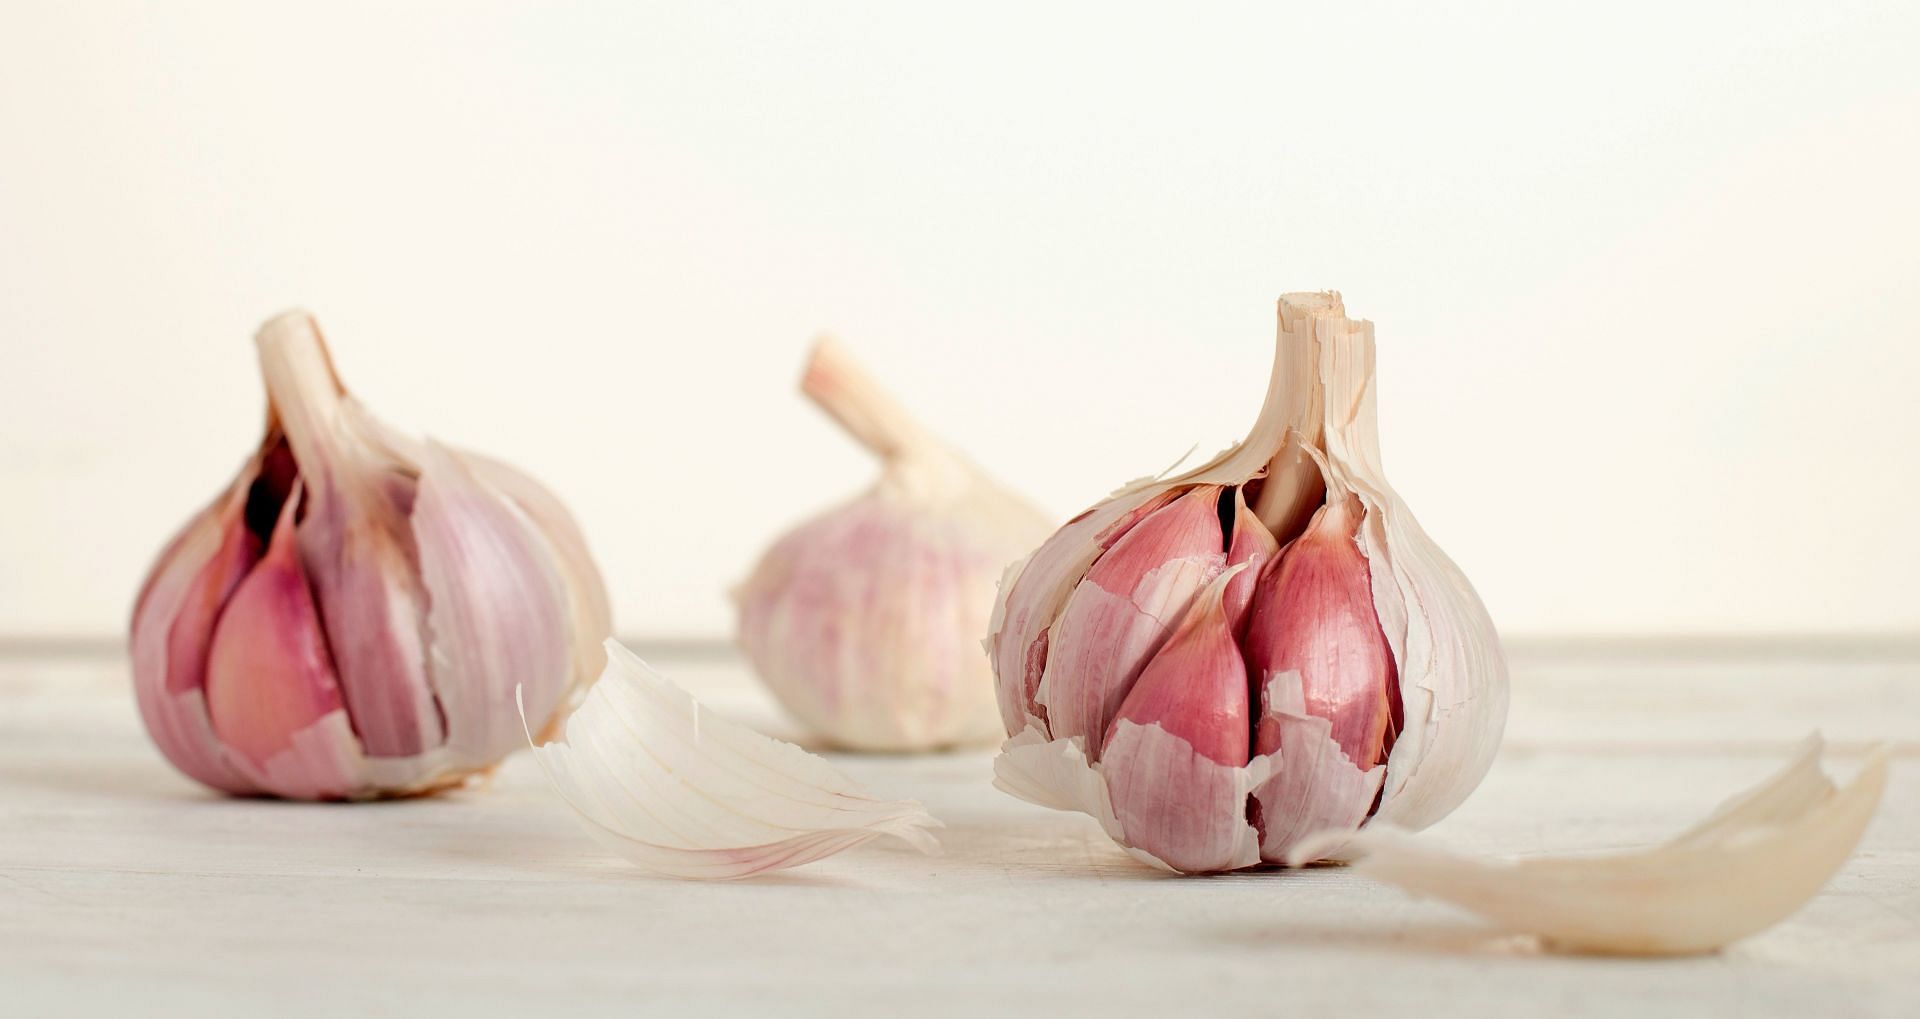 Nutrition in garlic: Is it beneficial? (Image via Unsplash/Mike Kenneally)